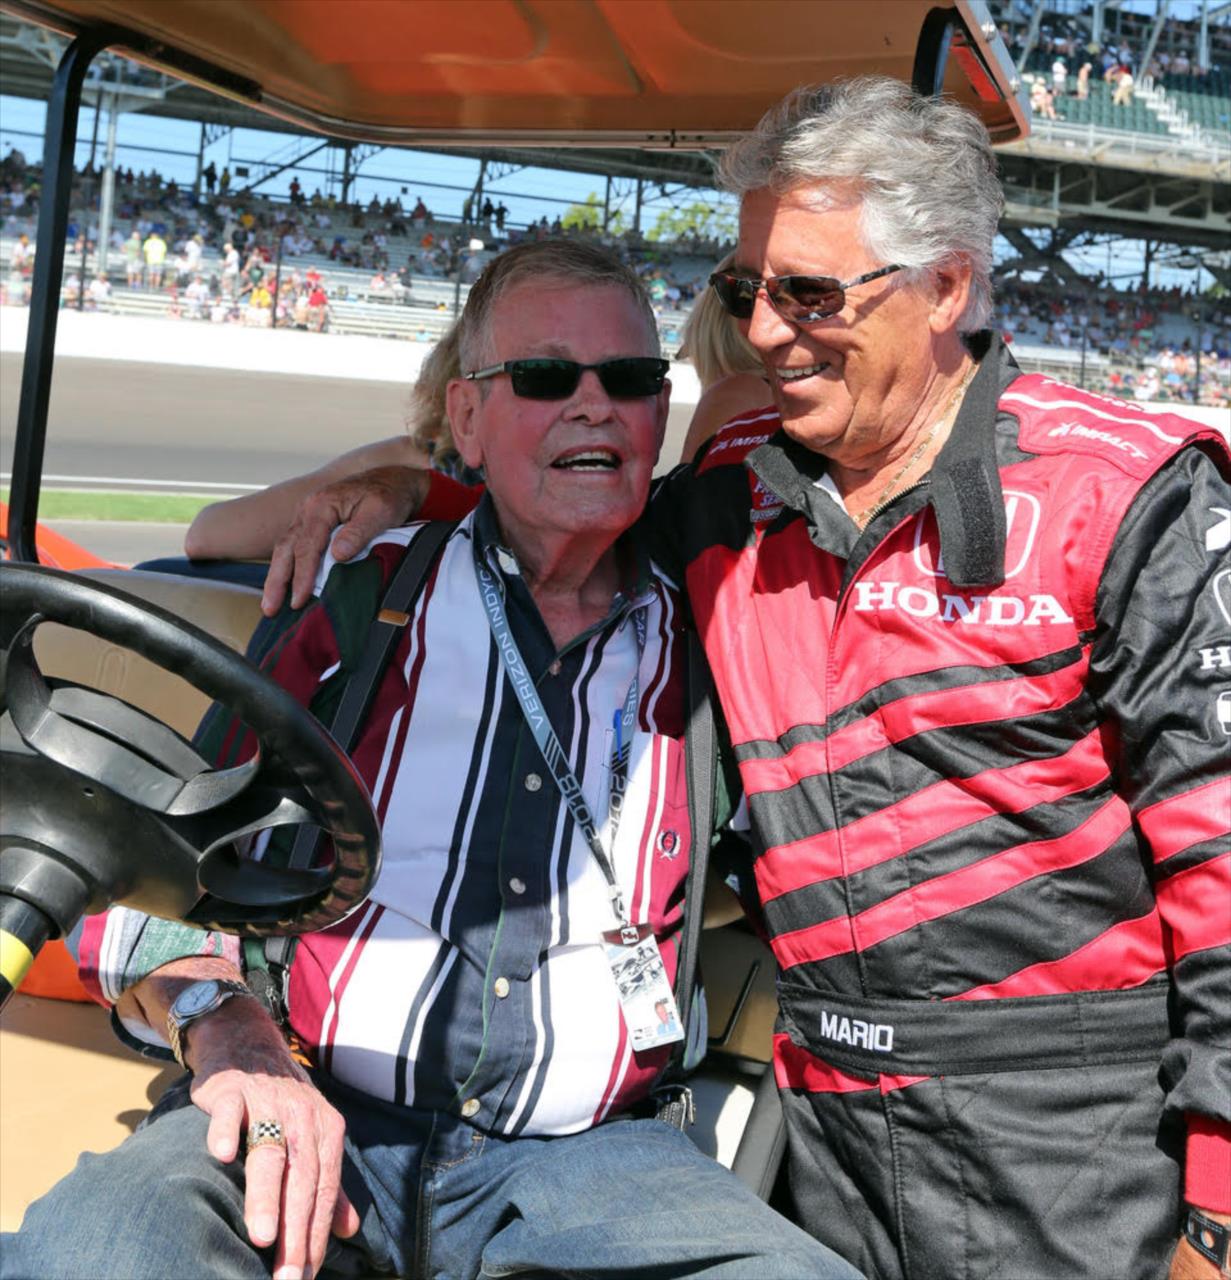 Bobby Unser chats with Mario Andretti during pre-race fesitivites prior to the start of the 2018 Indianapolis 500